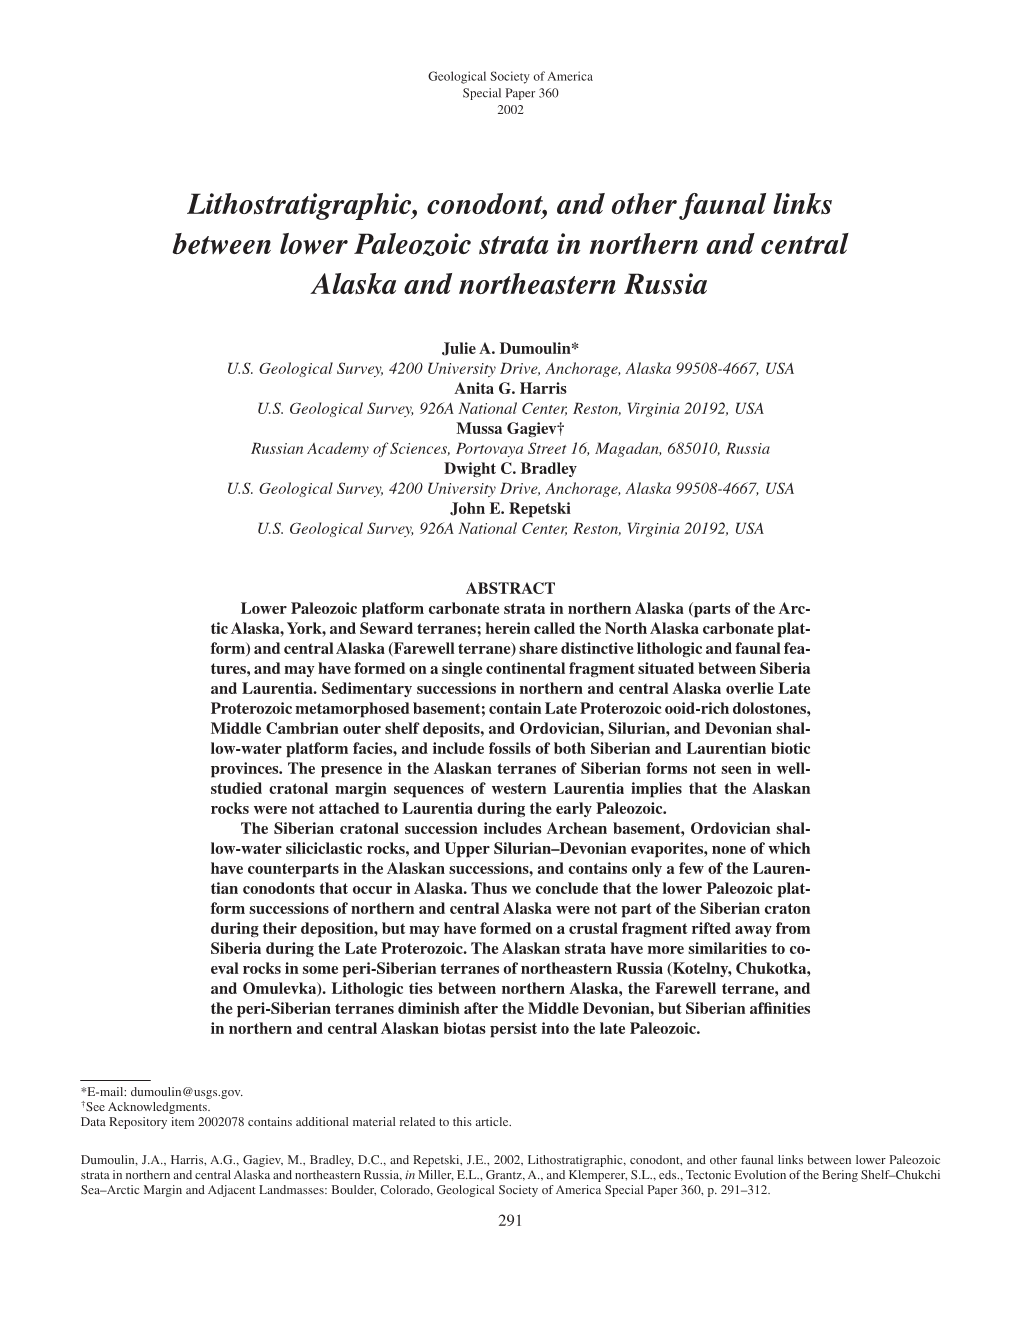 Lithostratigraphic, Conodont, and Other Faunal Links Between Lower Paleozoic Strata in Northern and Central Alaska and Northeastern Russia